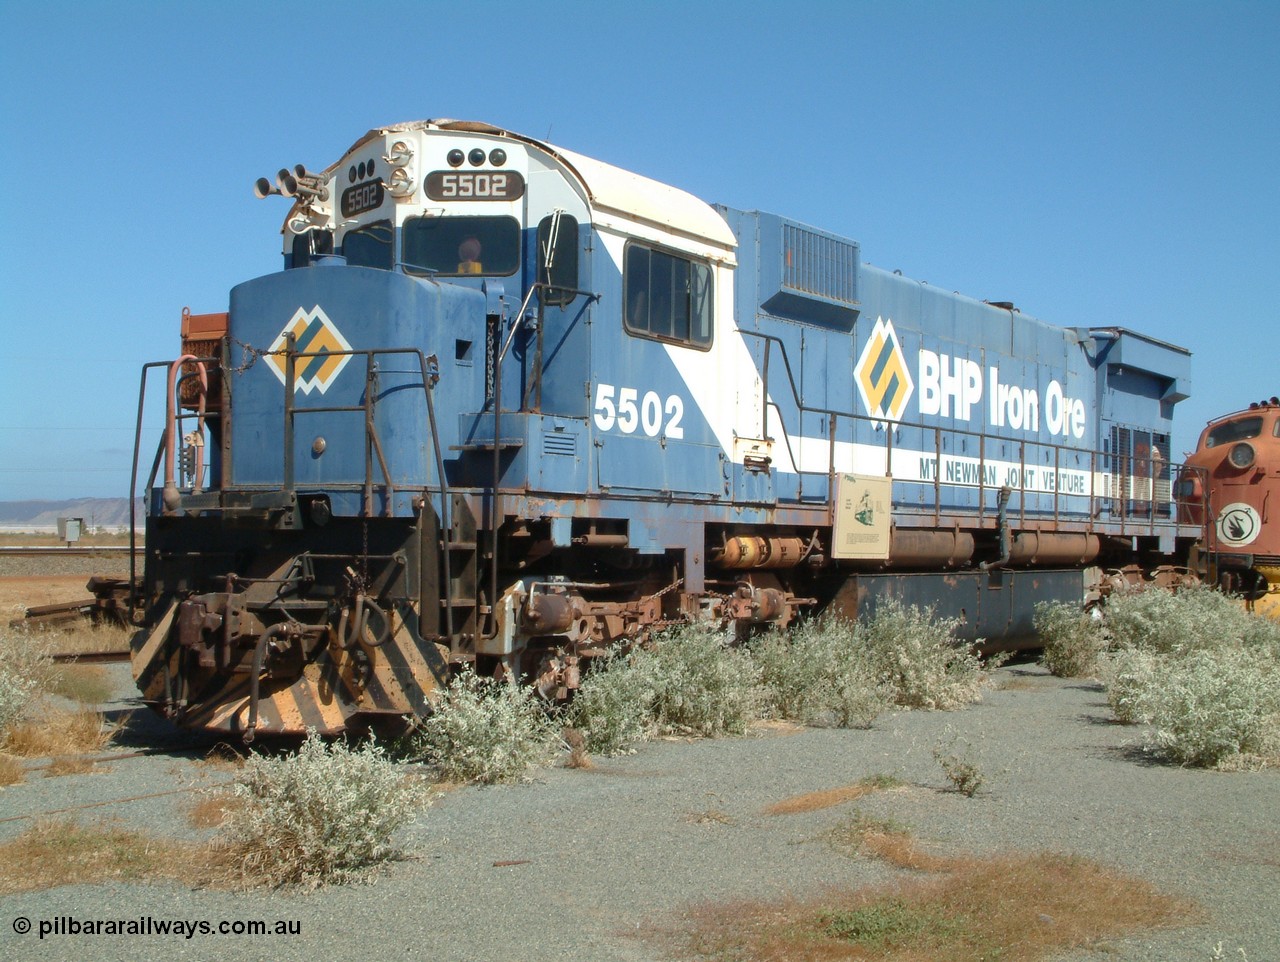 050109 092926
Pilbara Railways Historical Society, Australian built by Comeng NSW an MLW ALCo M636 unit formerly operated by Mt Newman Mining and BHP Iron Ore 5502 serial number C6096-7 built July 1976, retired in 1994 and donated to the Society in 1995. 9th October 2005.
Keywords: 5502;Comeng-NSW;MLW;ALCo;M636;C6096-7;